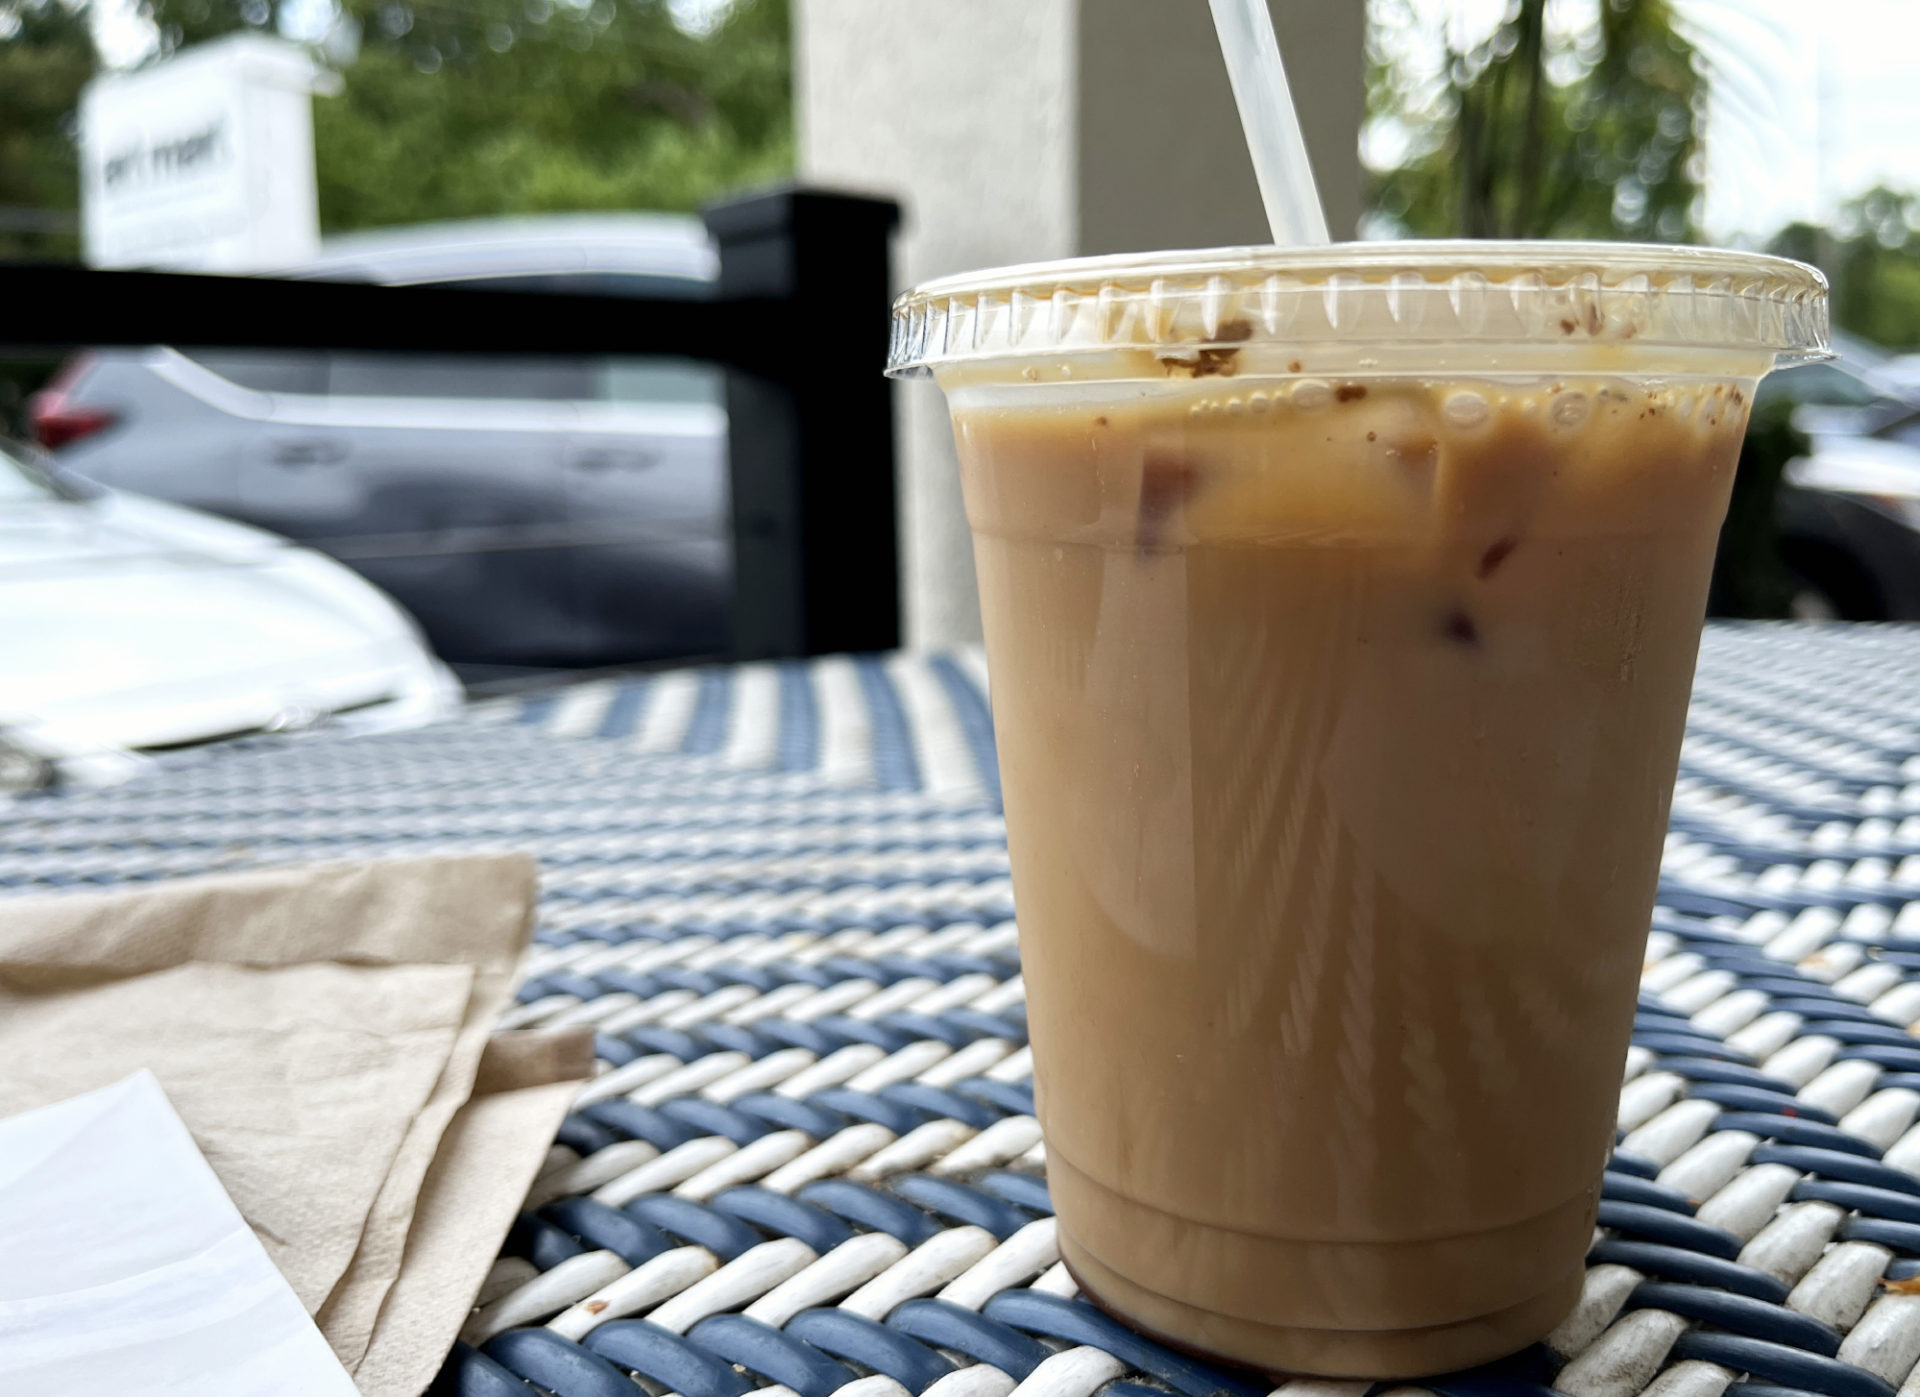 An iced coffee drink in a clear plastic cup is on a blue and white outdoor patio table. To the left of the image are some napkins and papers.